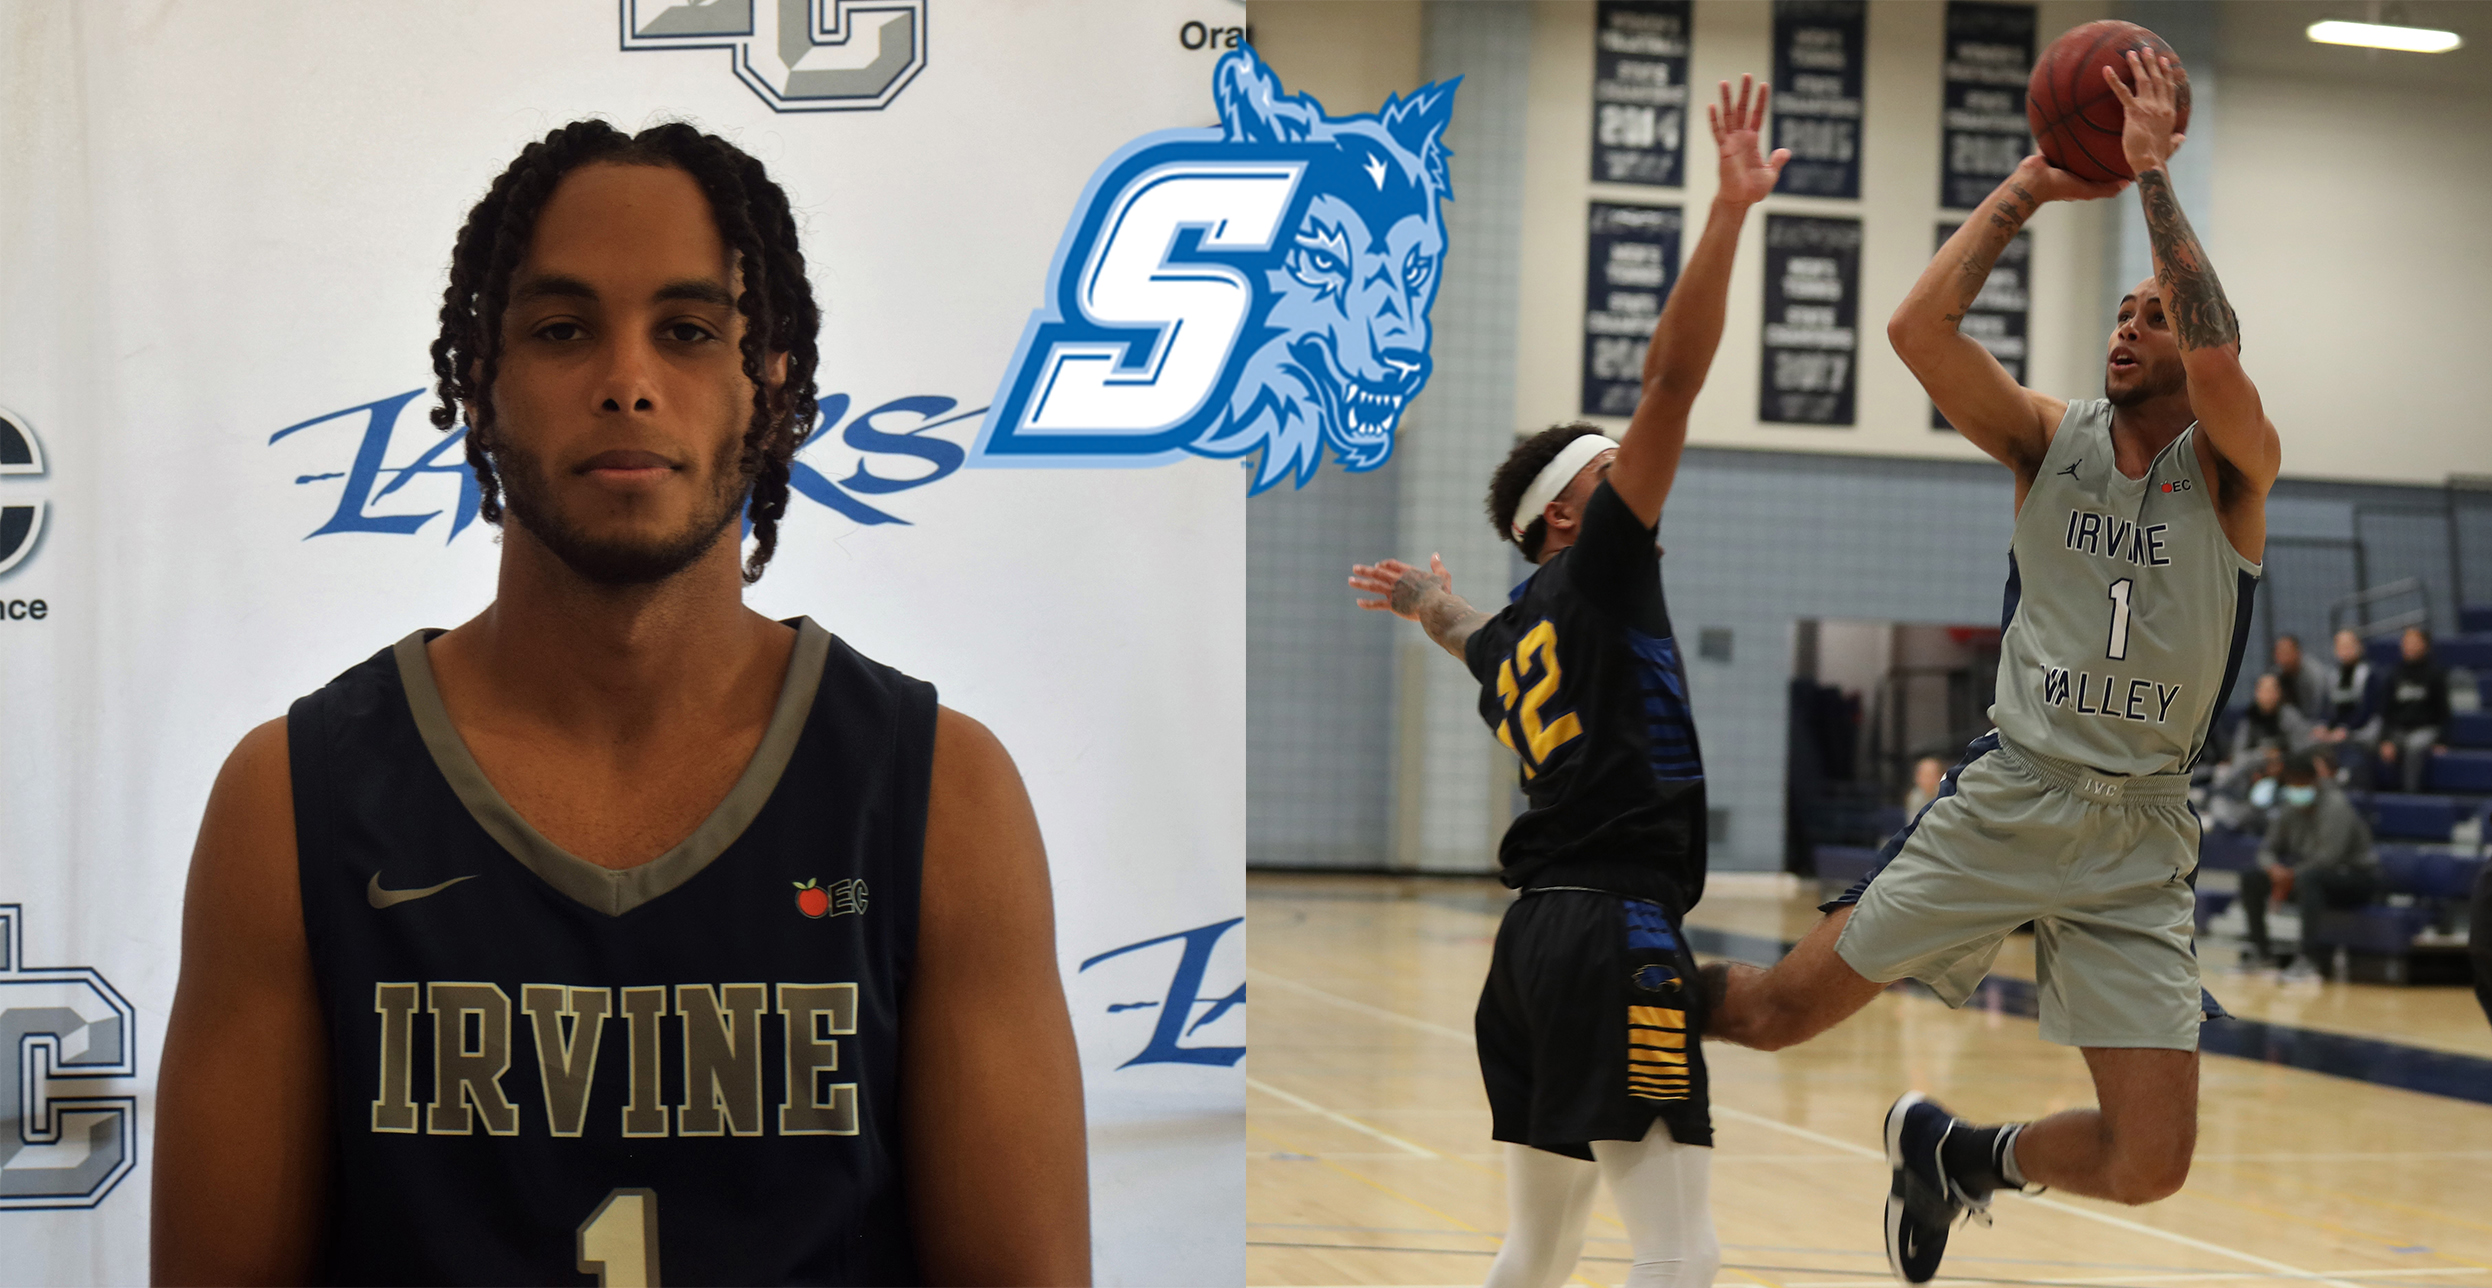 Men's basketball player JT Robinson headed to Sonoma State